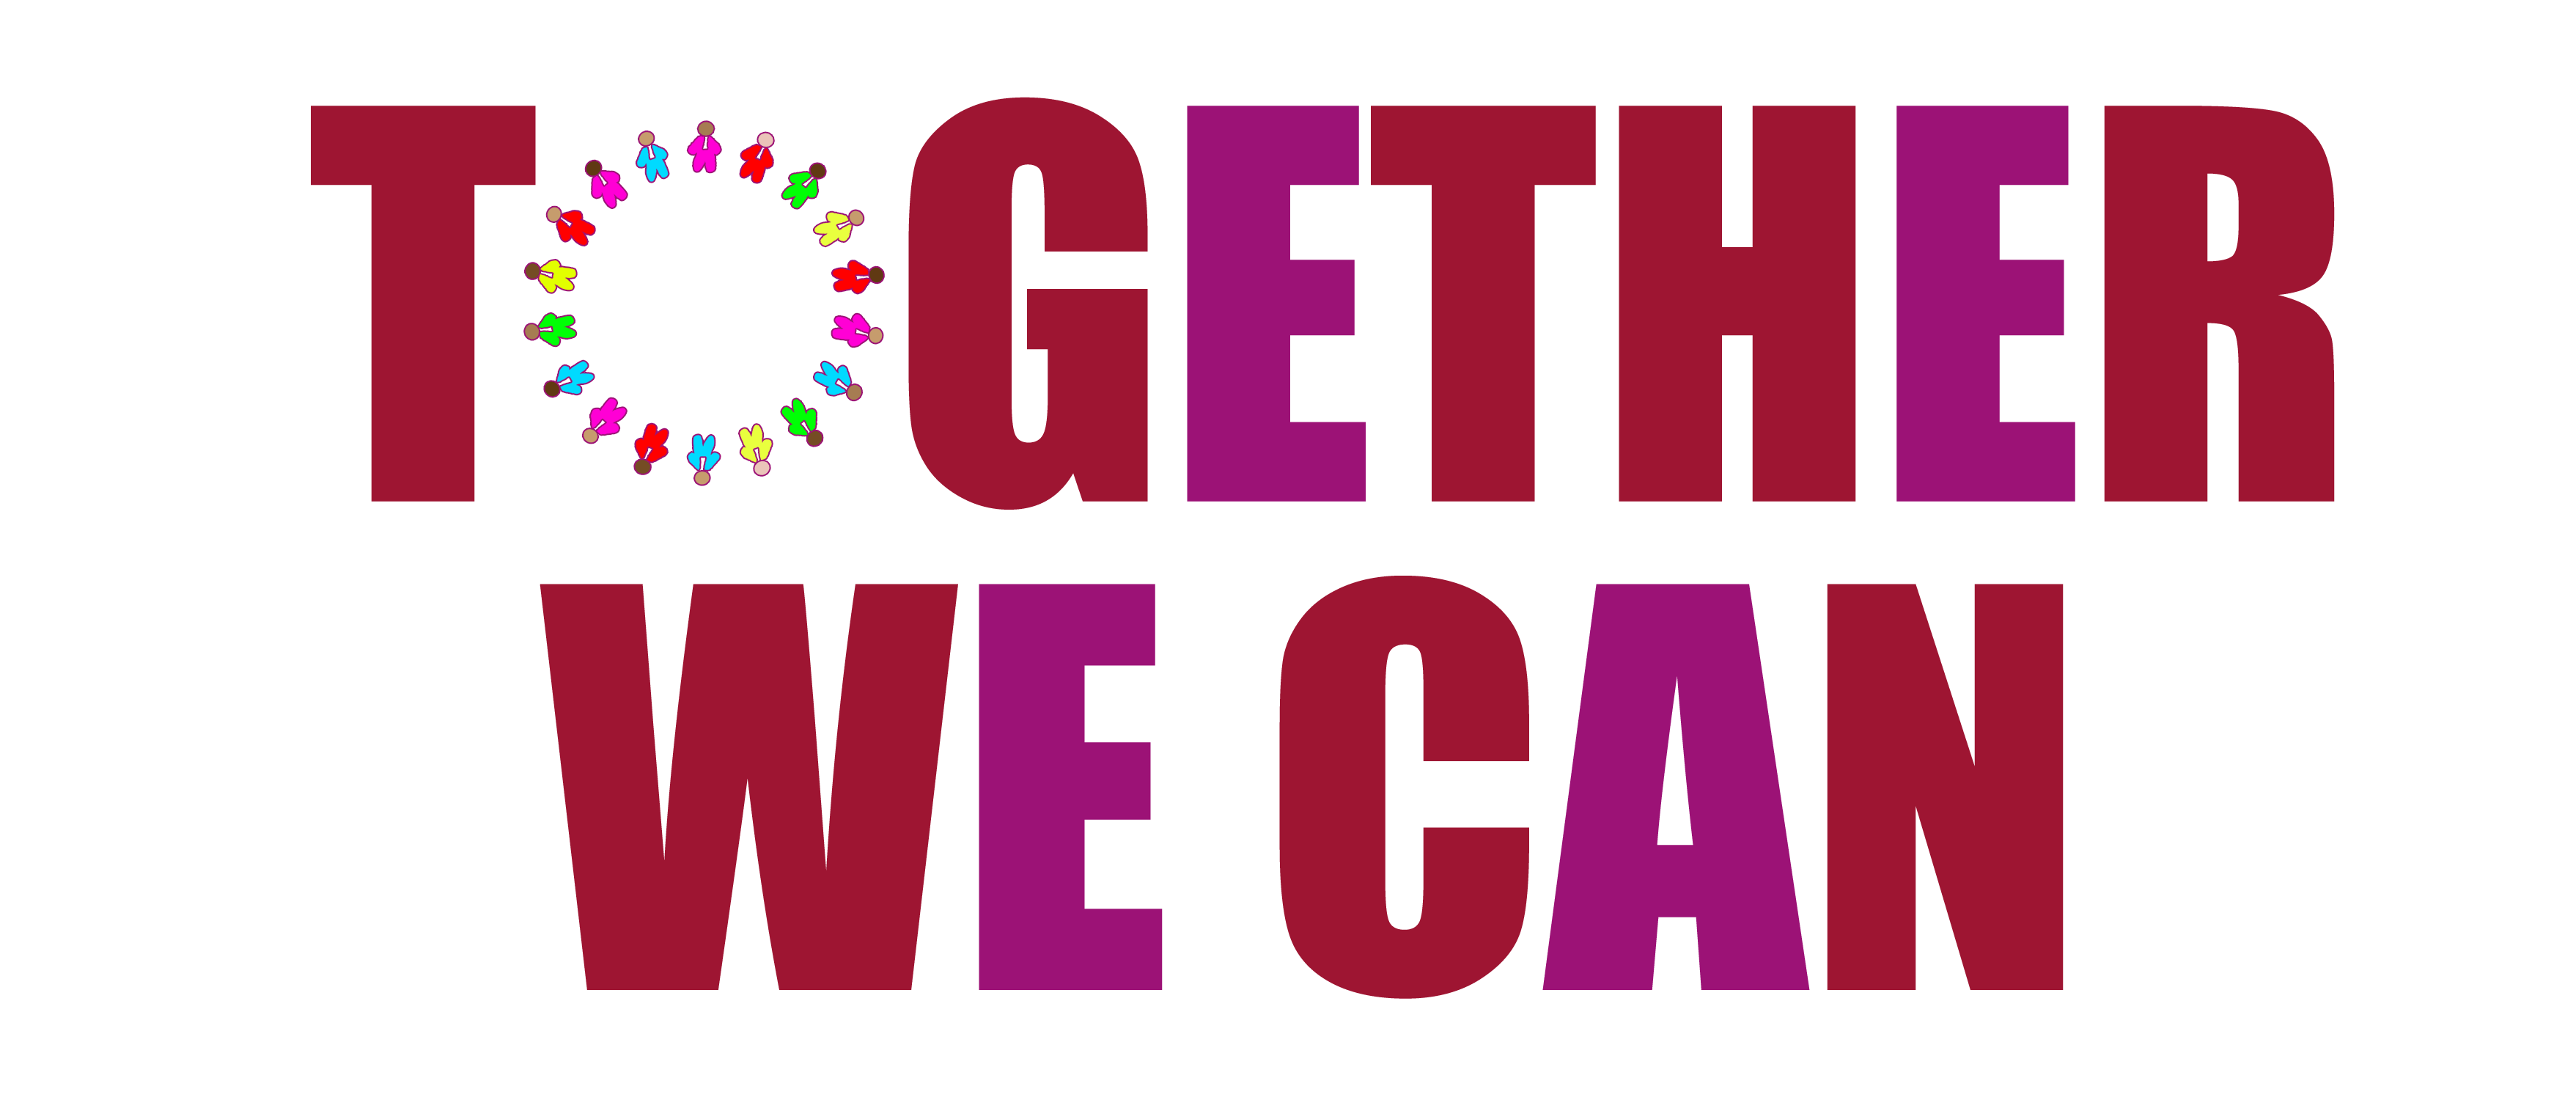 Together We Can is a global nonprofit whose mission is to provide opportunities and assistance for people in need.